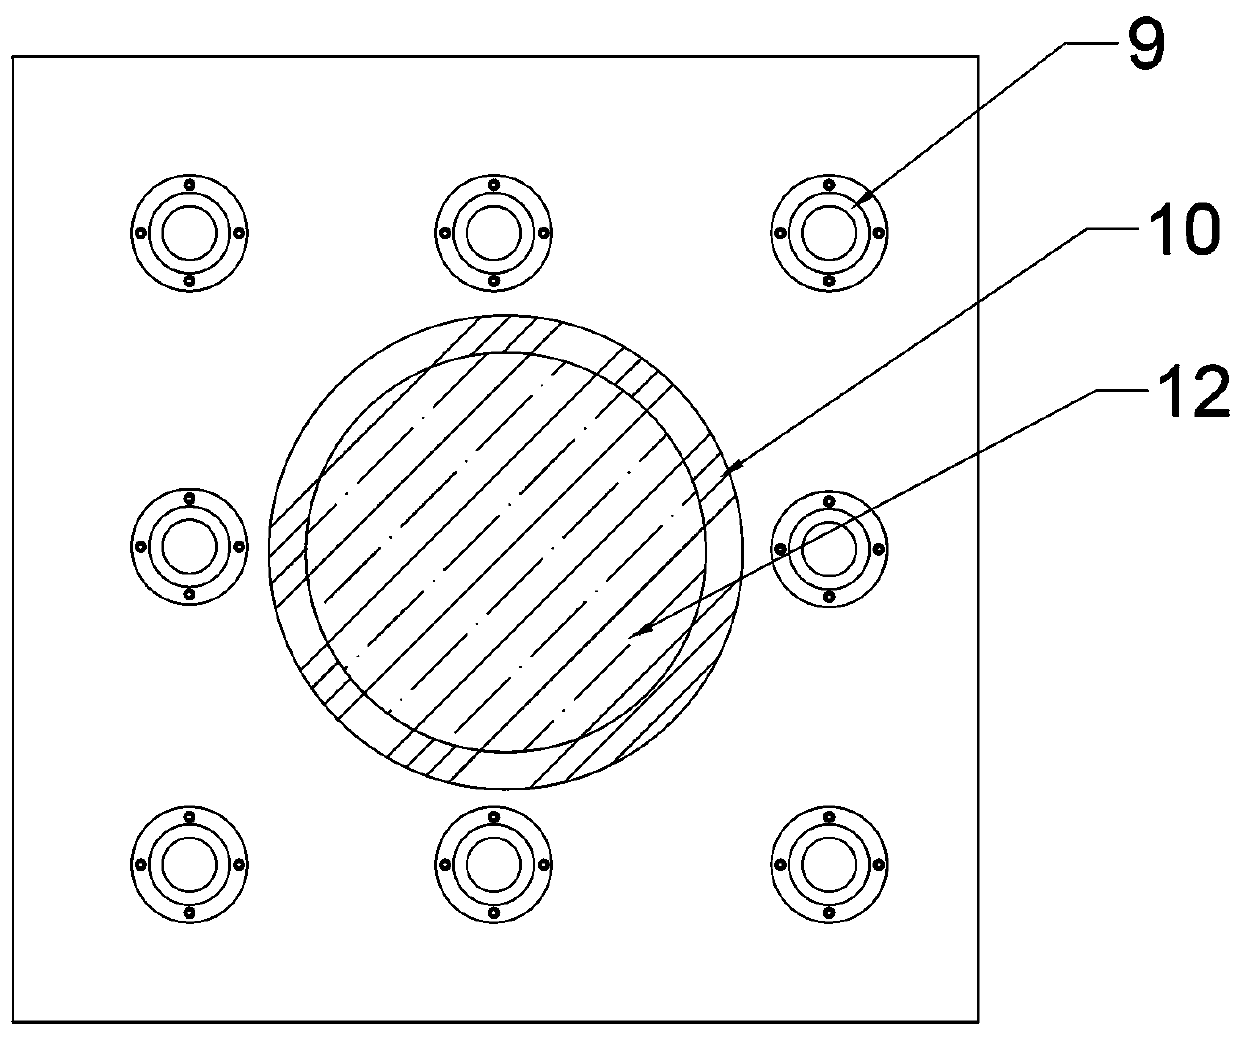 Connected two-way isolation bearing system